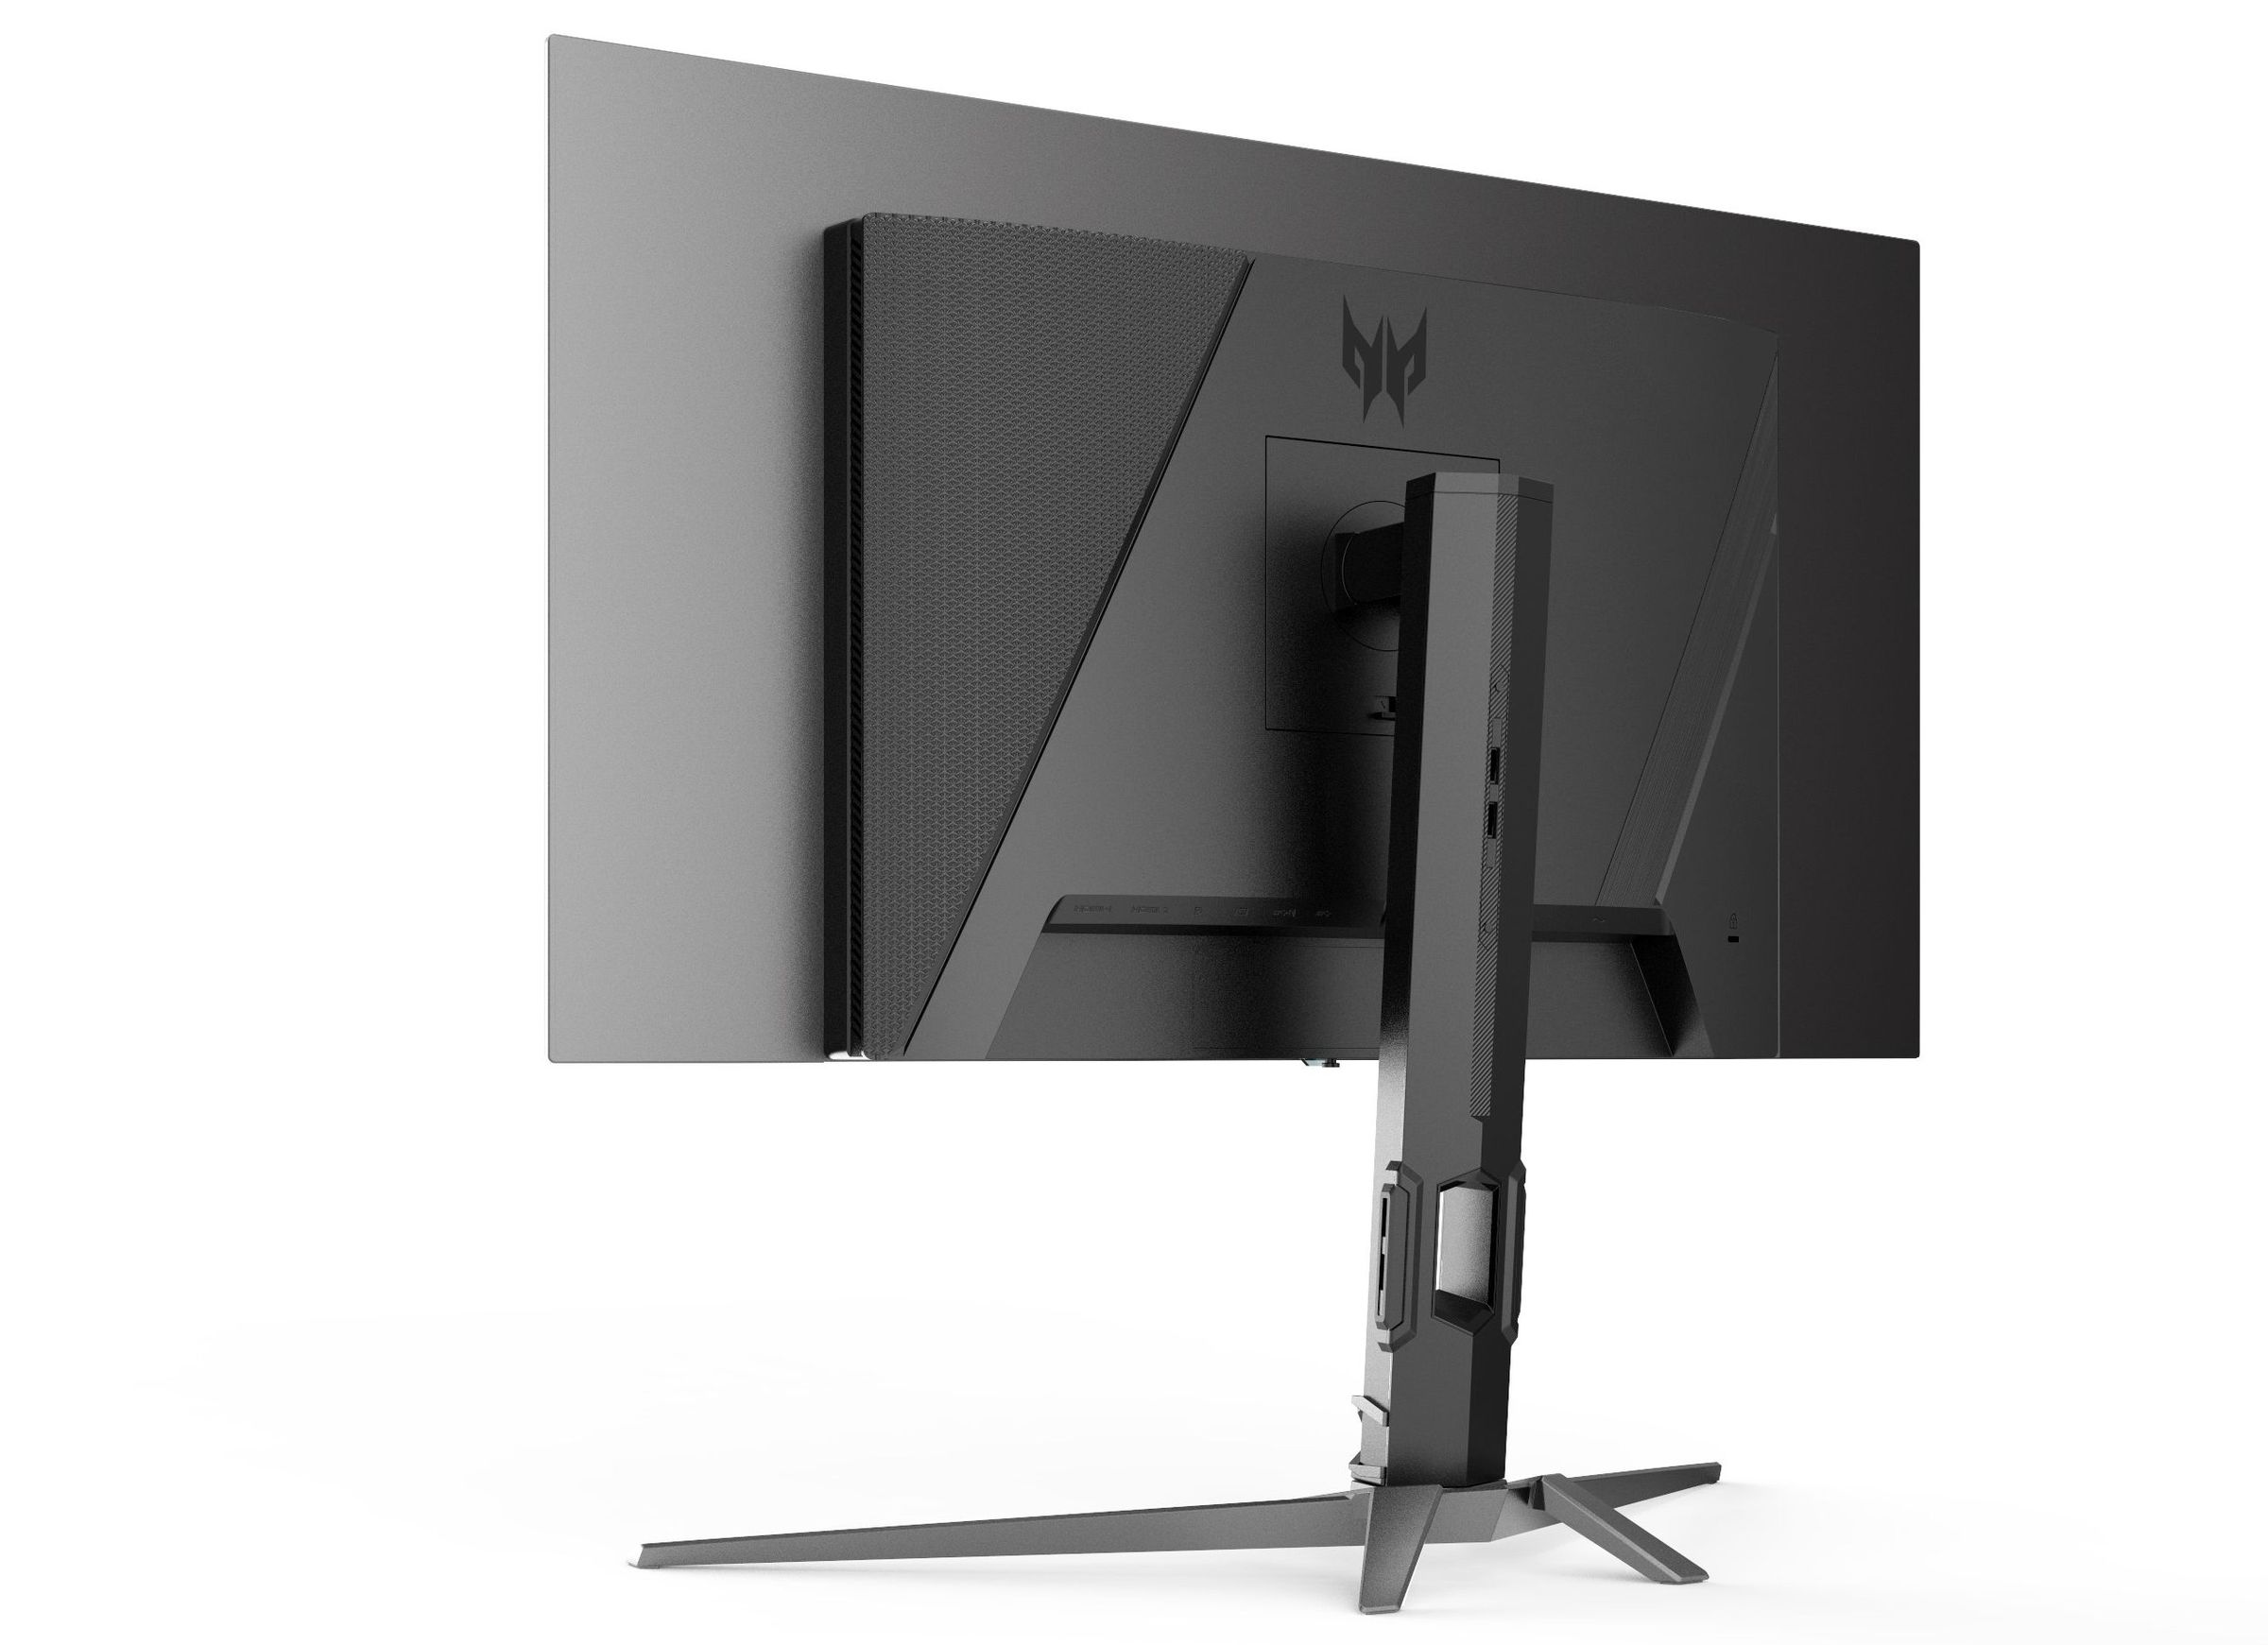 The Acer Predator X32 X3, coming Q4. There’s also an X34 X5 that’s a 34-inch curved OLED at 1440p240, and a X27U F3 that’s 26.5-inch OLED at 1440p480.